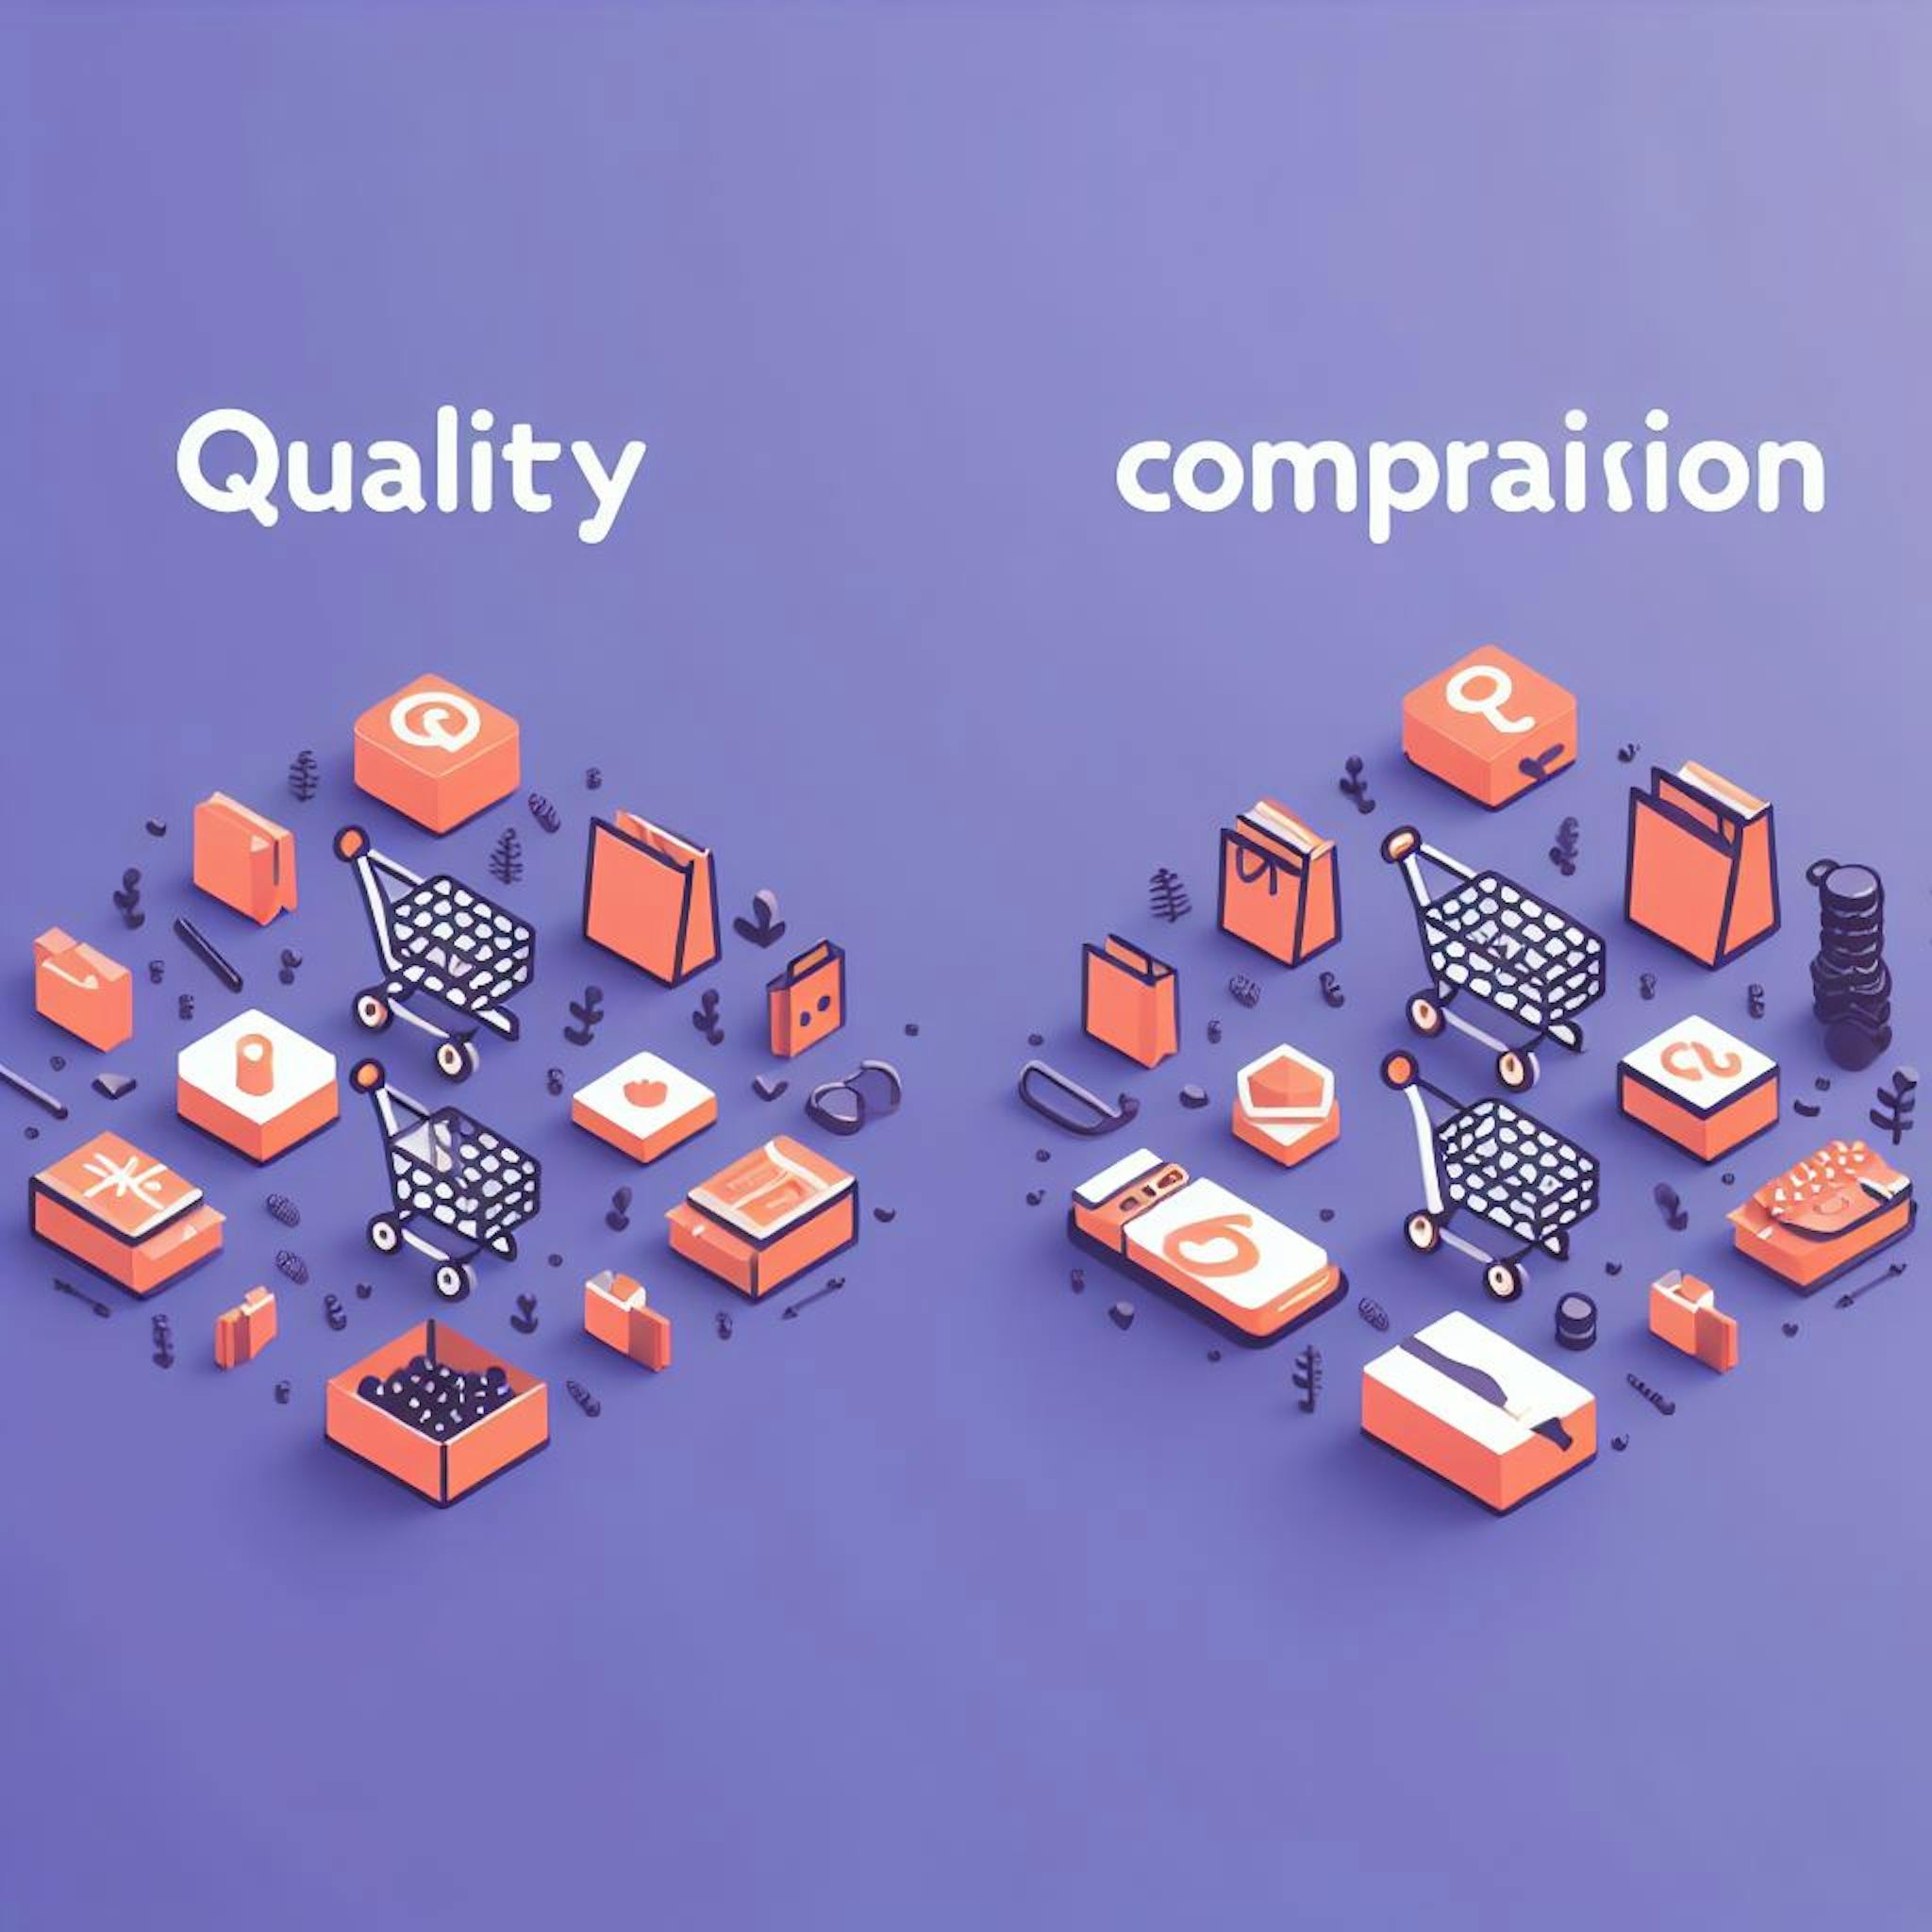 Quality comparison of two group with same icons on purple background. 